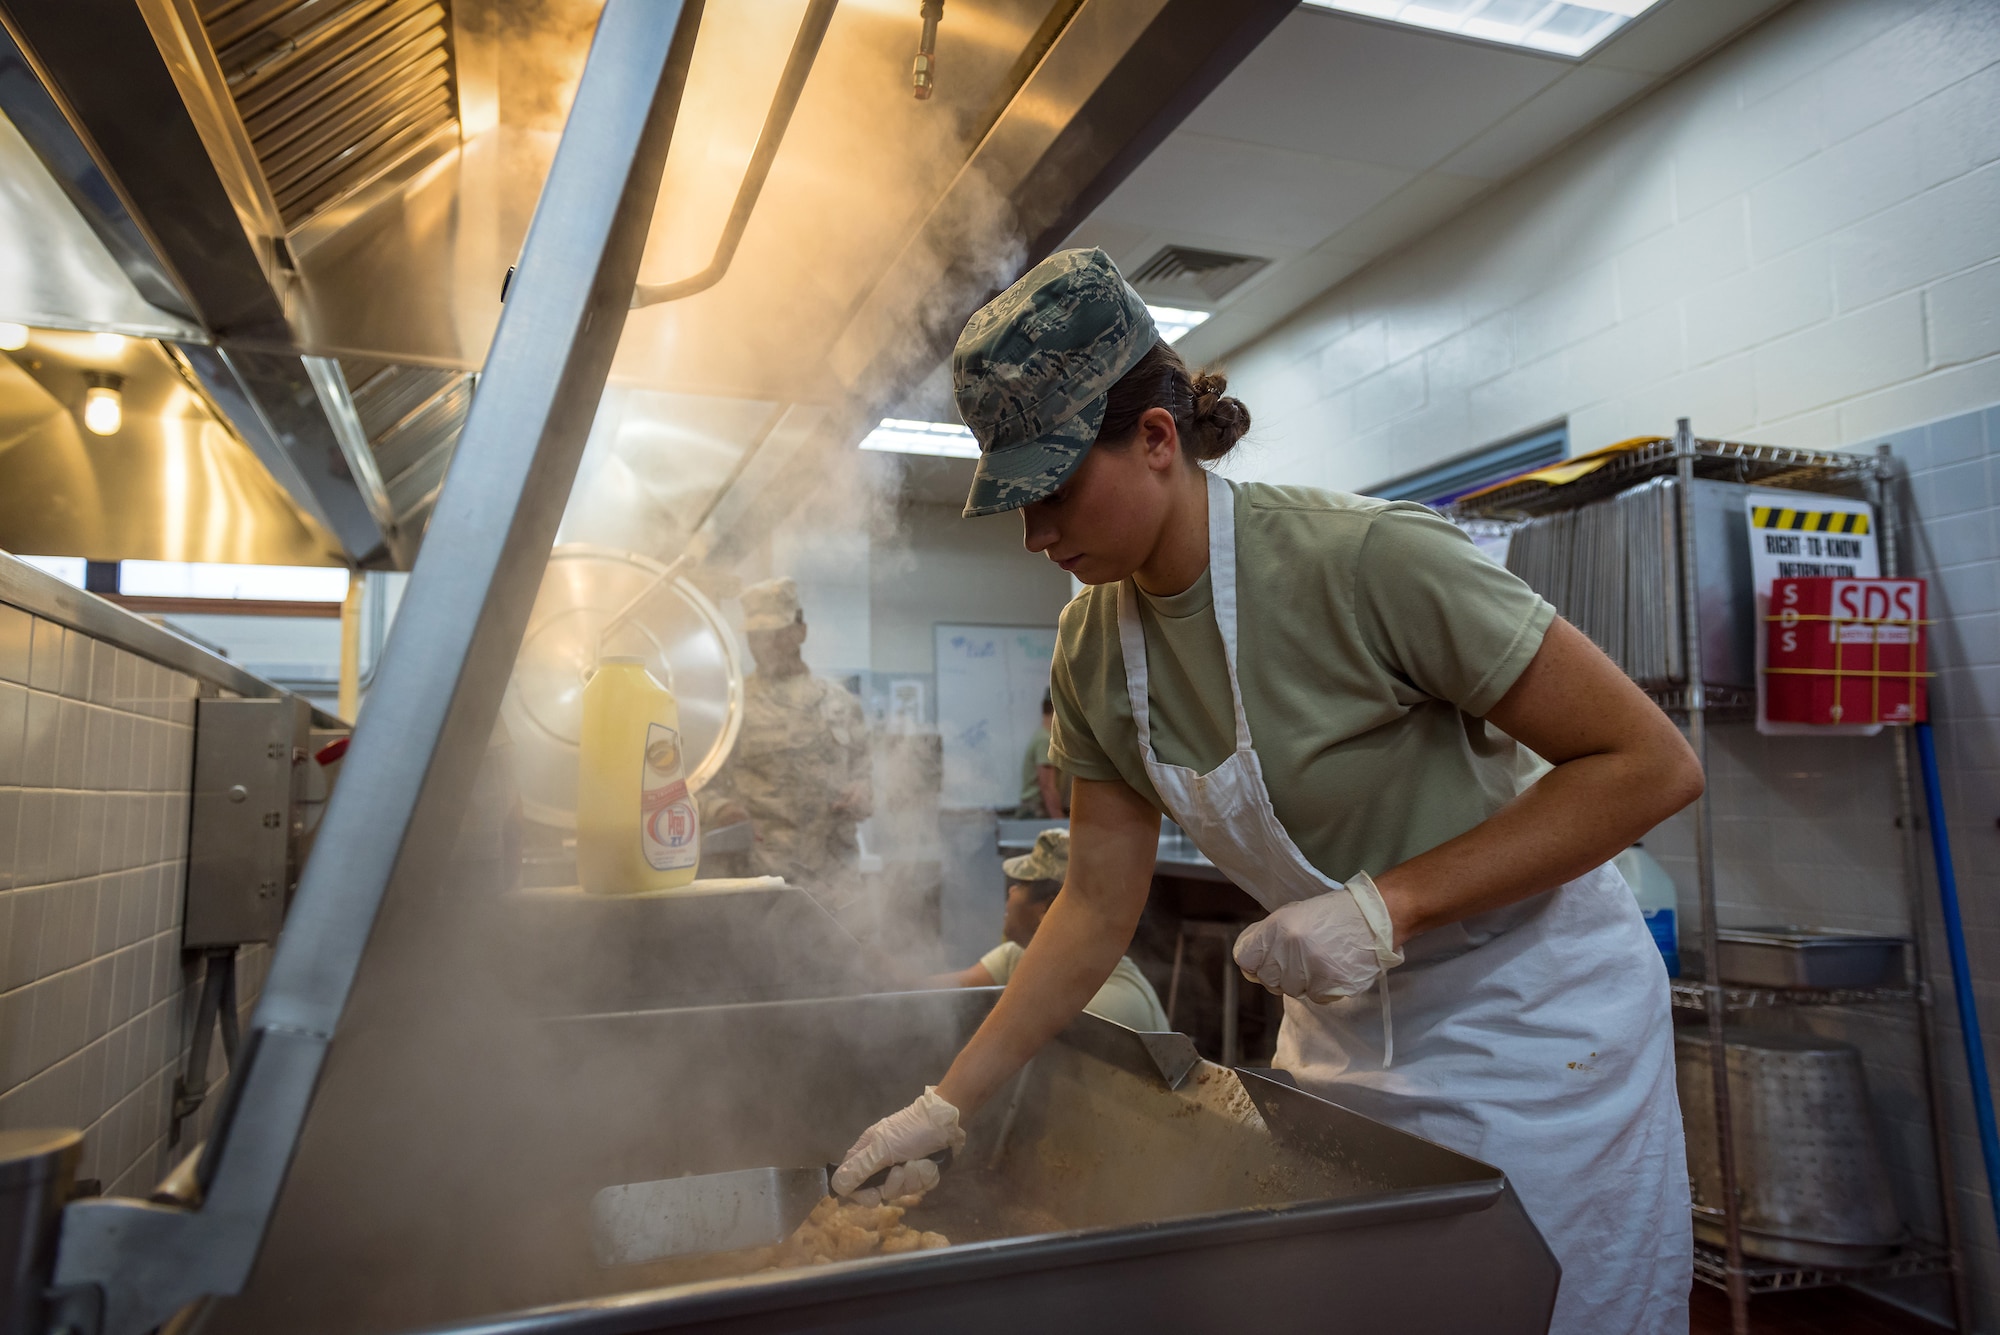 Katelyn Morris, a services specialist with the 182nd Force Support Squadron, Illinois Air National Guard, cooks shrimp